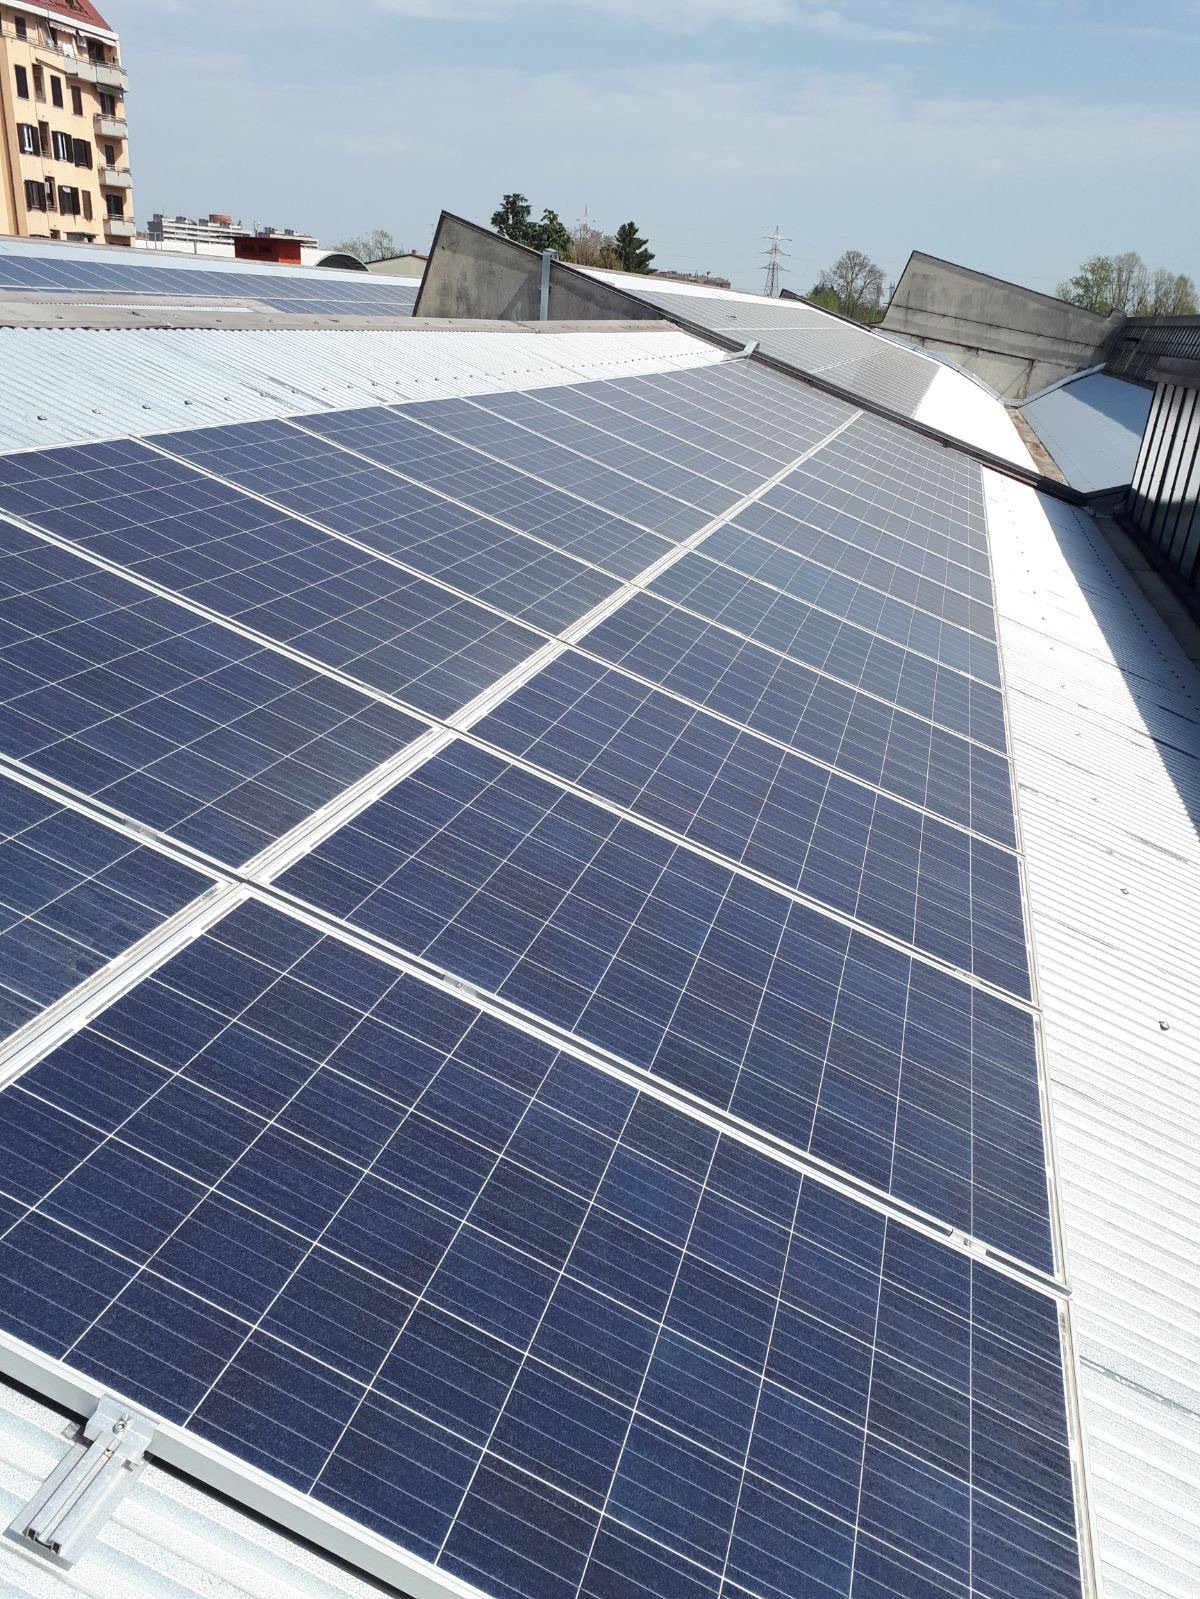 Design of Photovoltaic Company in Milan